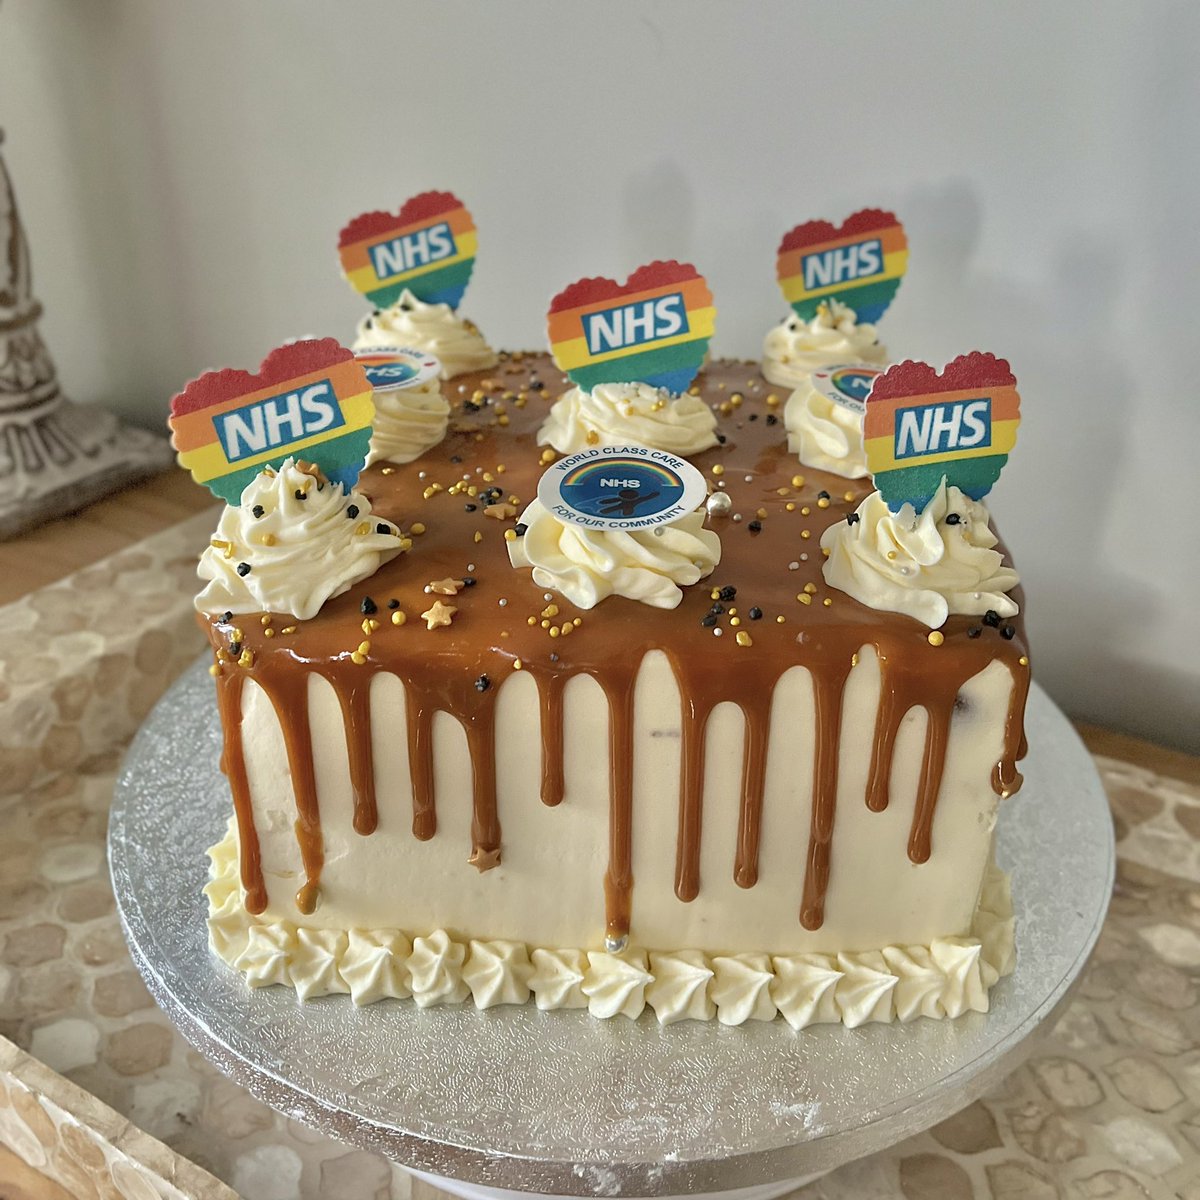 Mrs Wright’s Cake Delights bagged the 3rd spot at the Royal Surrey NHS Bake Off 2022 @RSCharity #nhsbakeoff #nhsbirthday #royalsurreycharity #mrswrightscakedelights